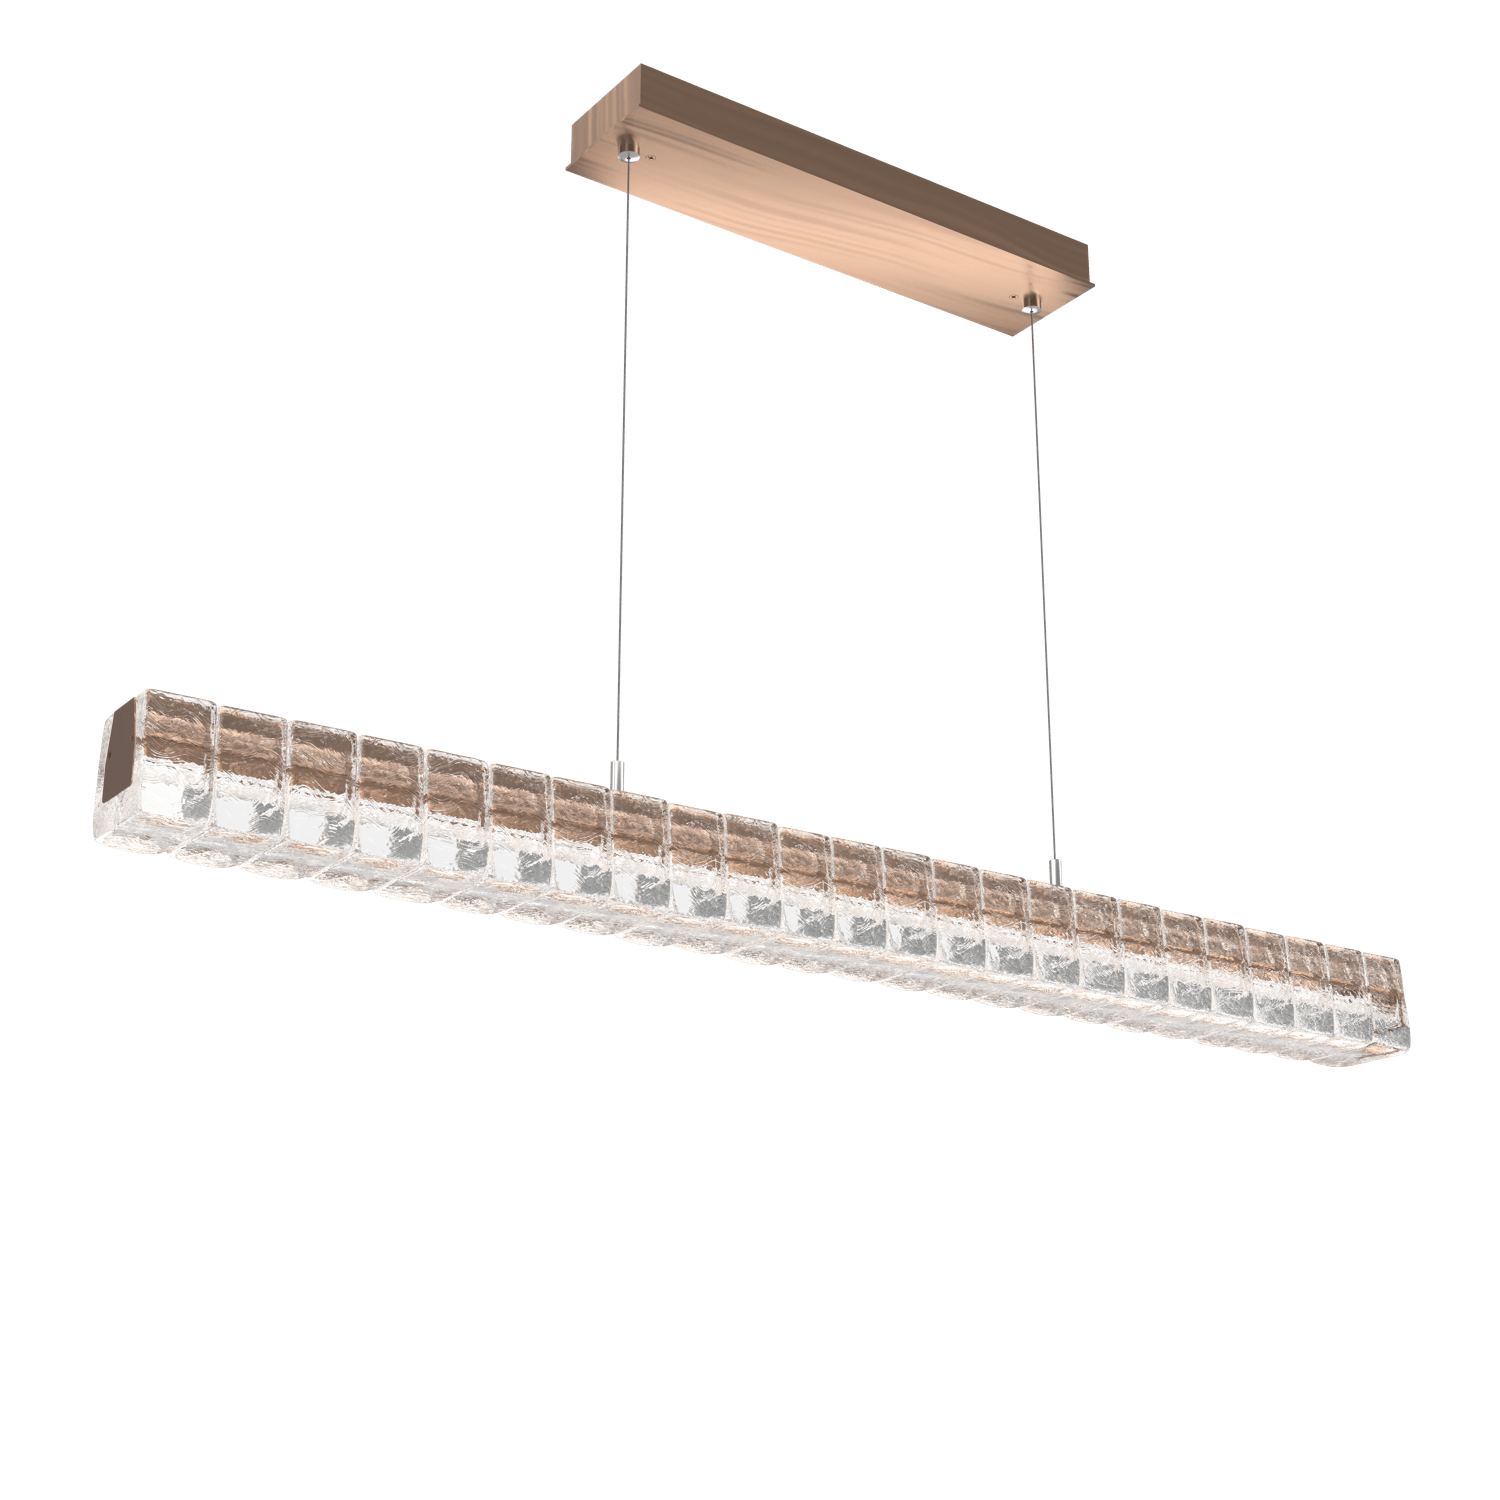 PLB0080-48-RB-Hammerton-Studio-Asscher-48-inch-linear-chandelier-with-oil-rubbed-bronze-finish-and-clear-cast-glass-shades-and-LED-lamping